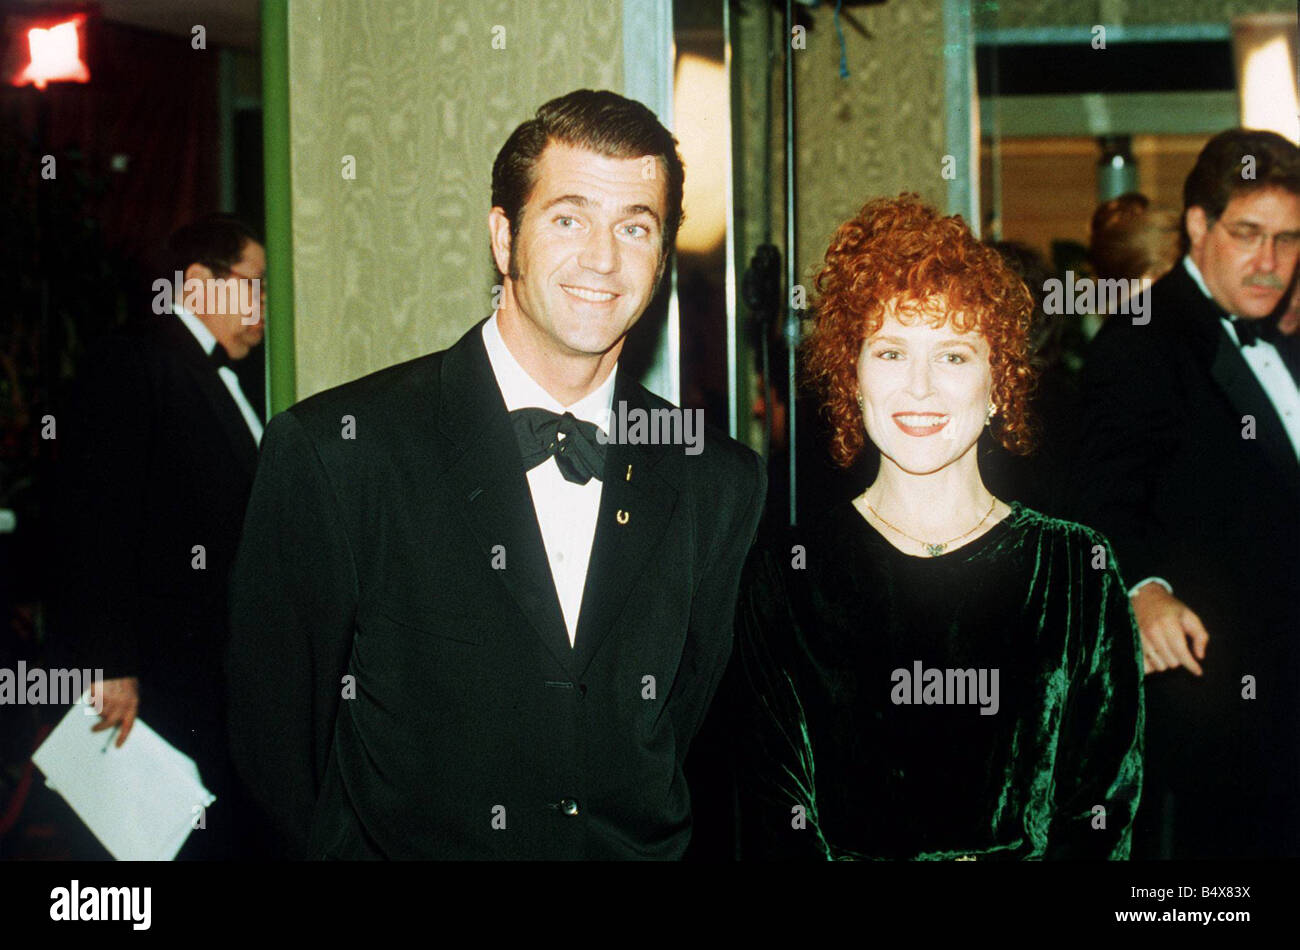 Mel Gibson Royal Premiere film A Man Without a Face dinner jacket wife green dress red hair Stock Photo